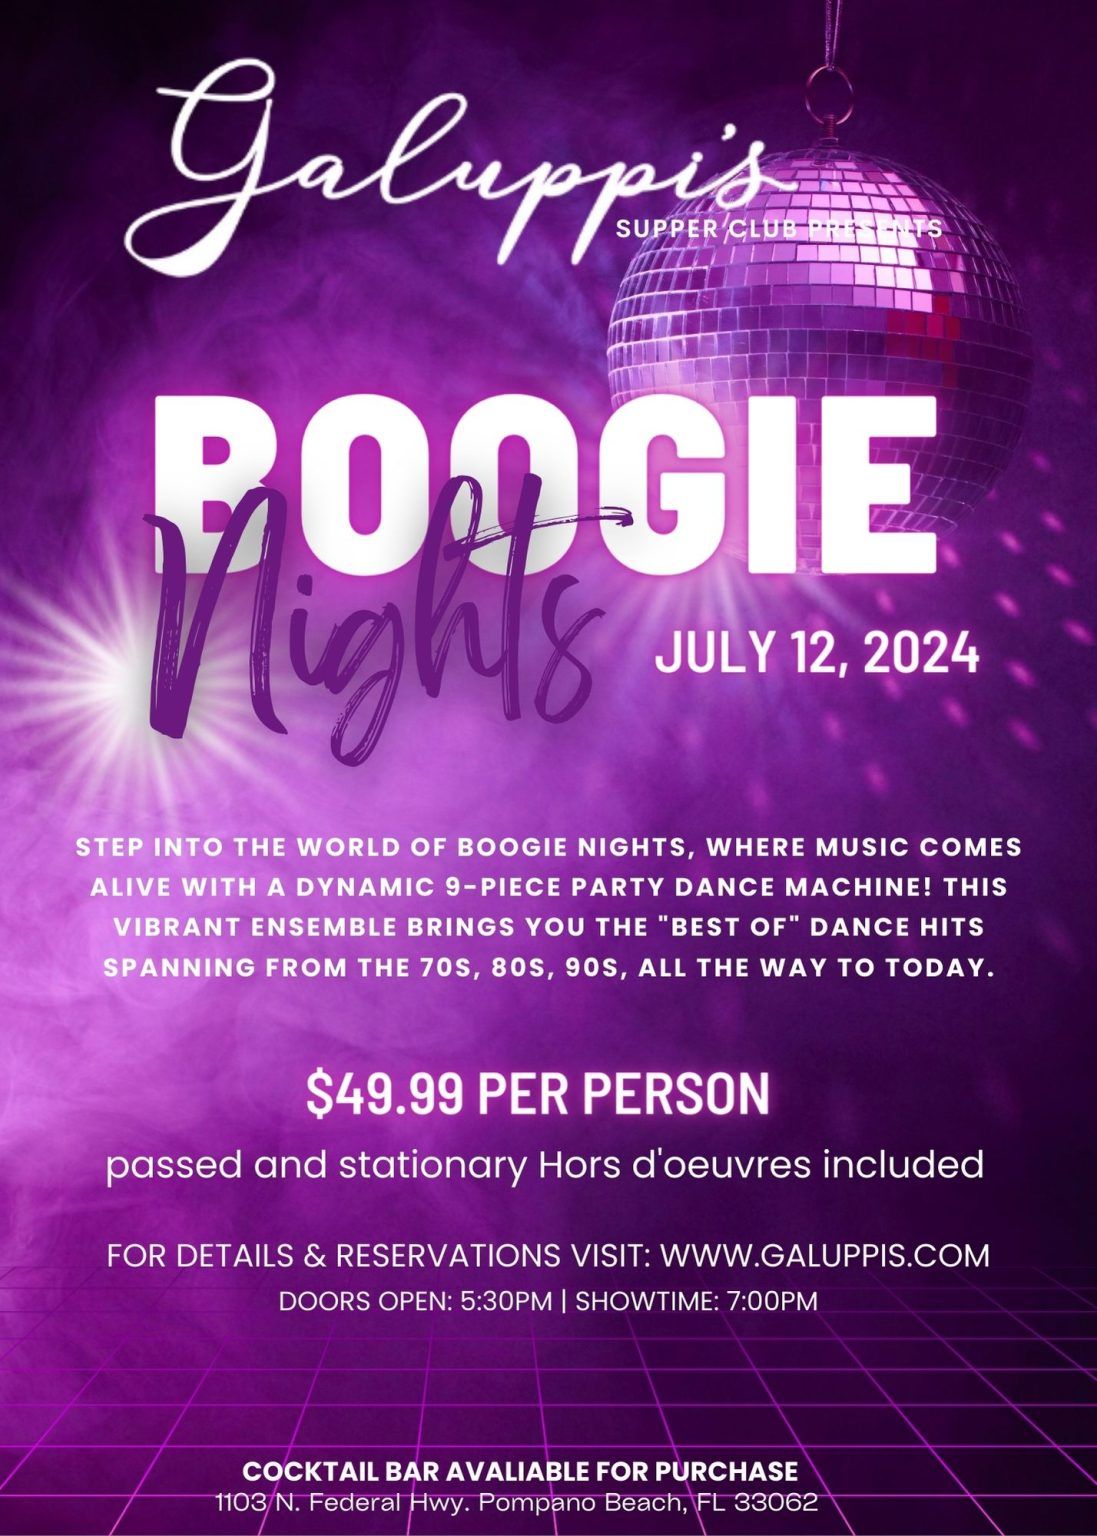 Boogie Nights Cocktail Party on The Deck @ Galuppi's Friday July 12